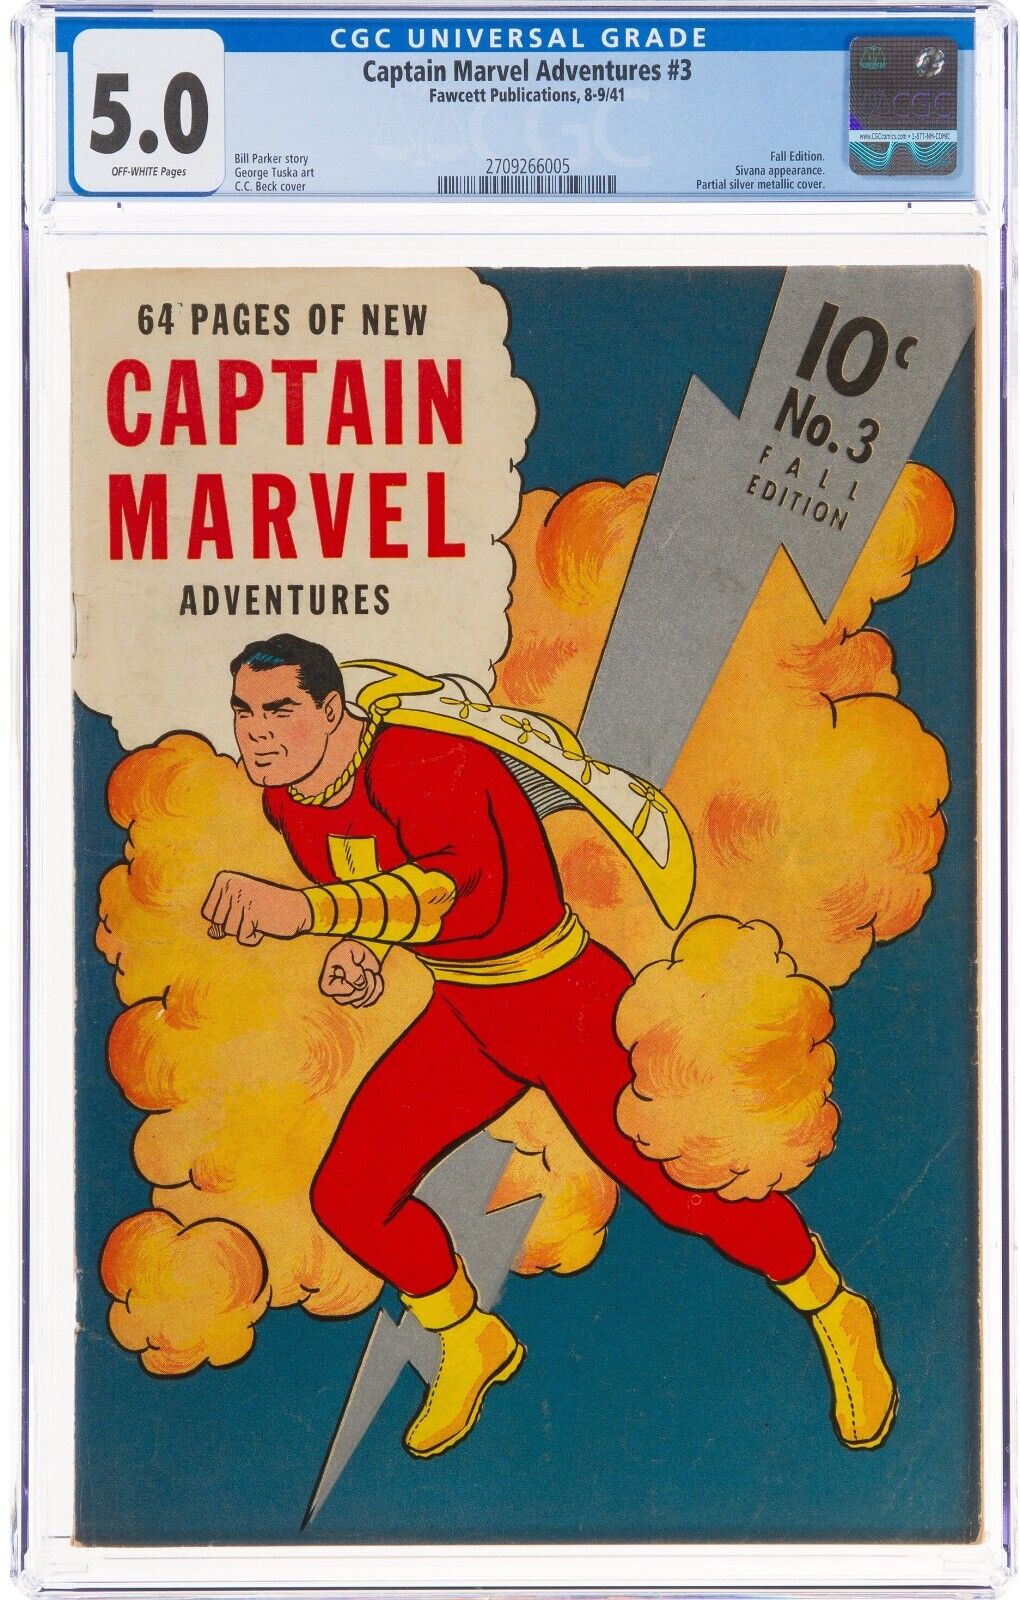 Captain Marvel Adventures #3 1941 ⭐ CGC 5.0 OW Pages ⭐Sivana Appearance ⭐Fawcett